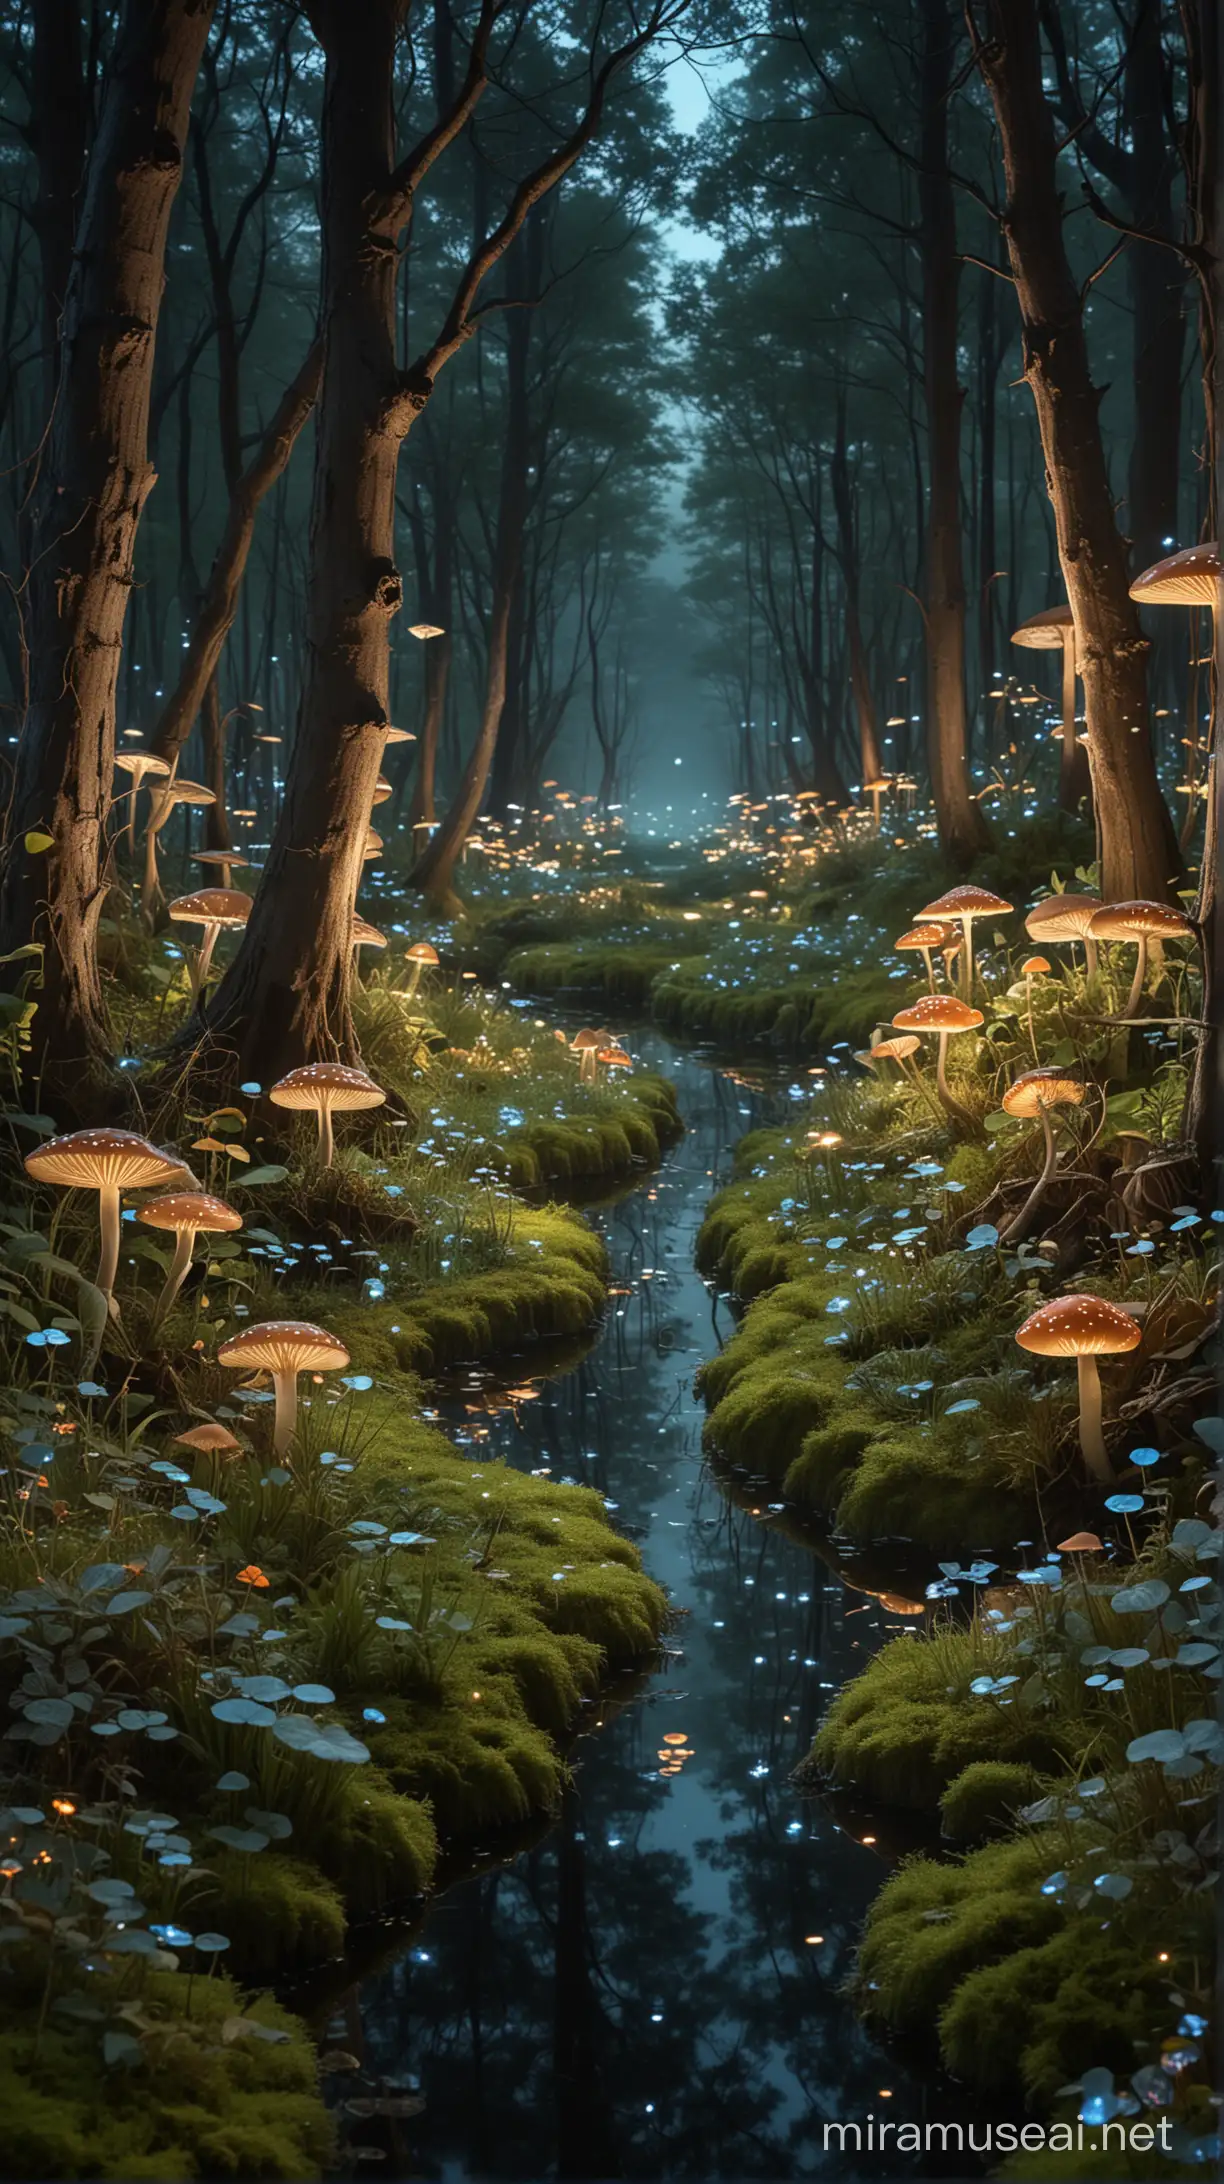 A magical nighttime forest where the ground and trees are illuminated by bioluminescent plants and mushrooms. A small, clear stream meanders through, reflecting the ethereal glow. The air is filled with tiny, light-emitting creatures, adding a sense of wonder and enchantment to the scene.